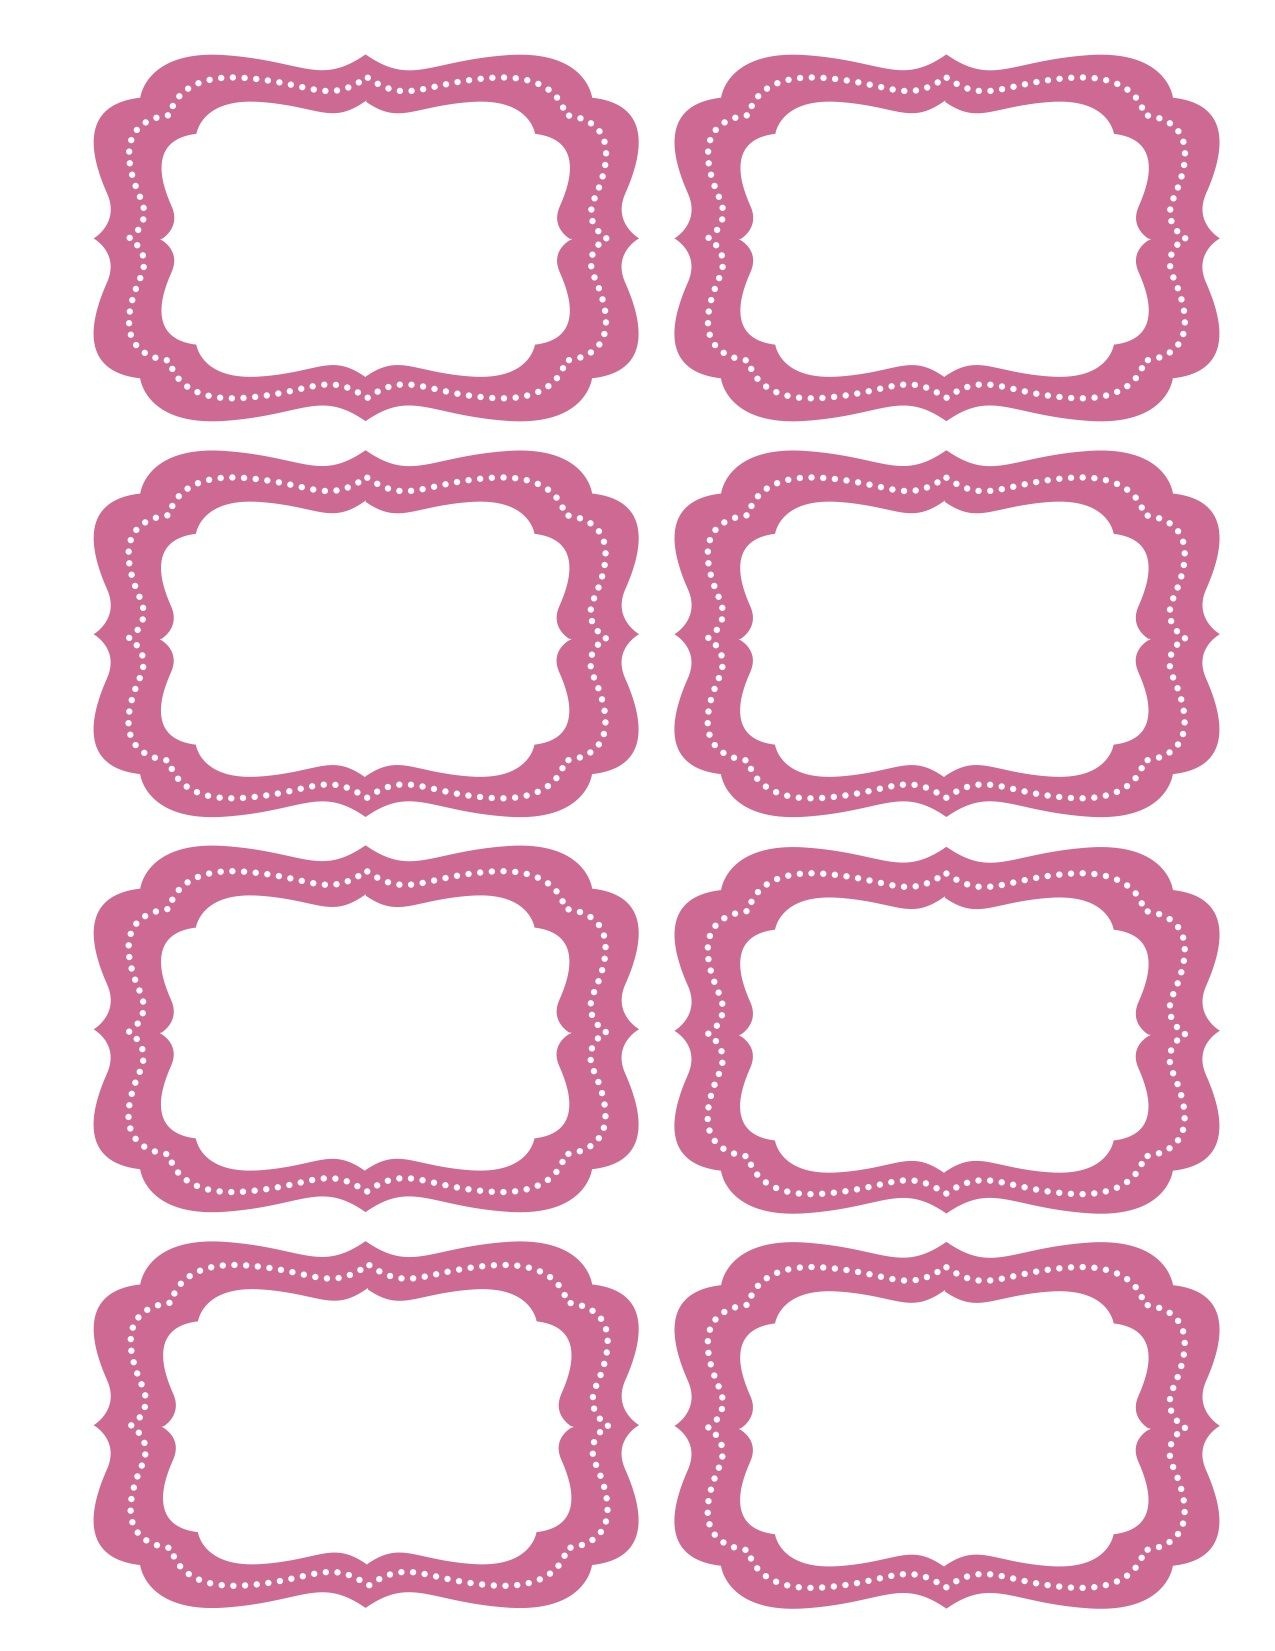 Free Printable Bag Label Templates | Candy Labels Blank Image - Free Printable Label Templates